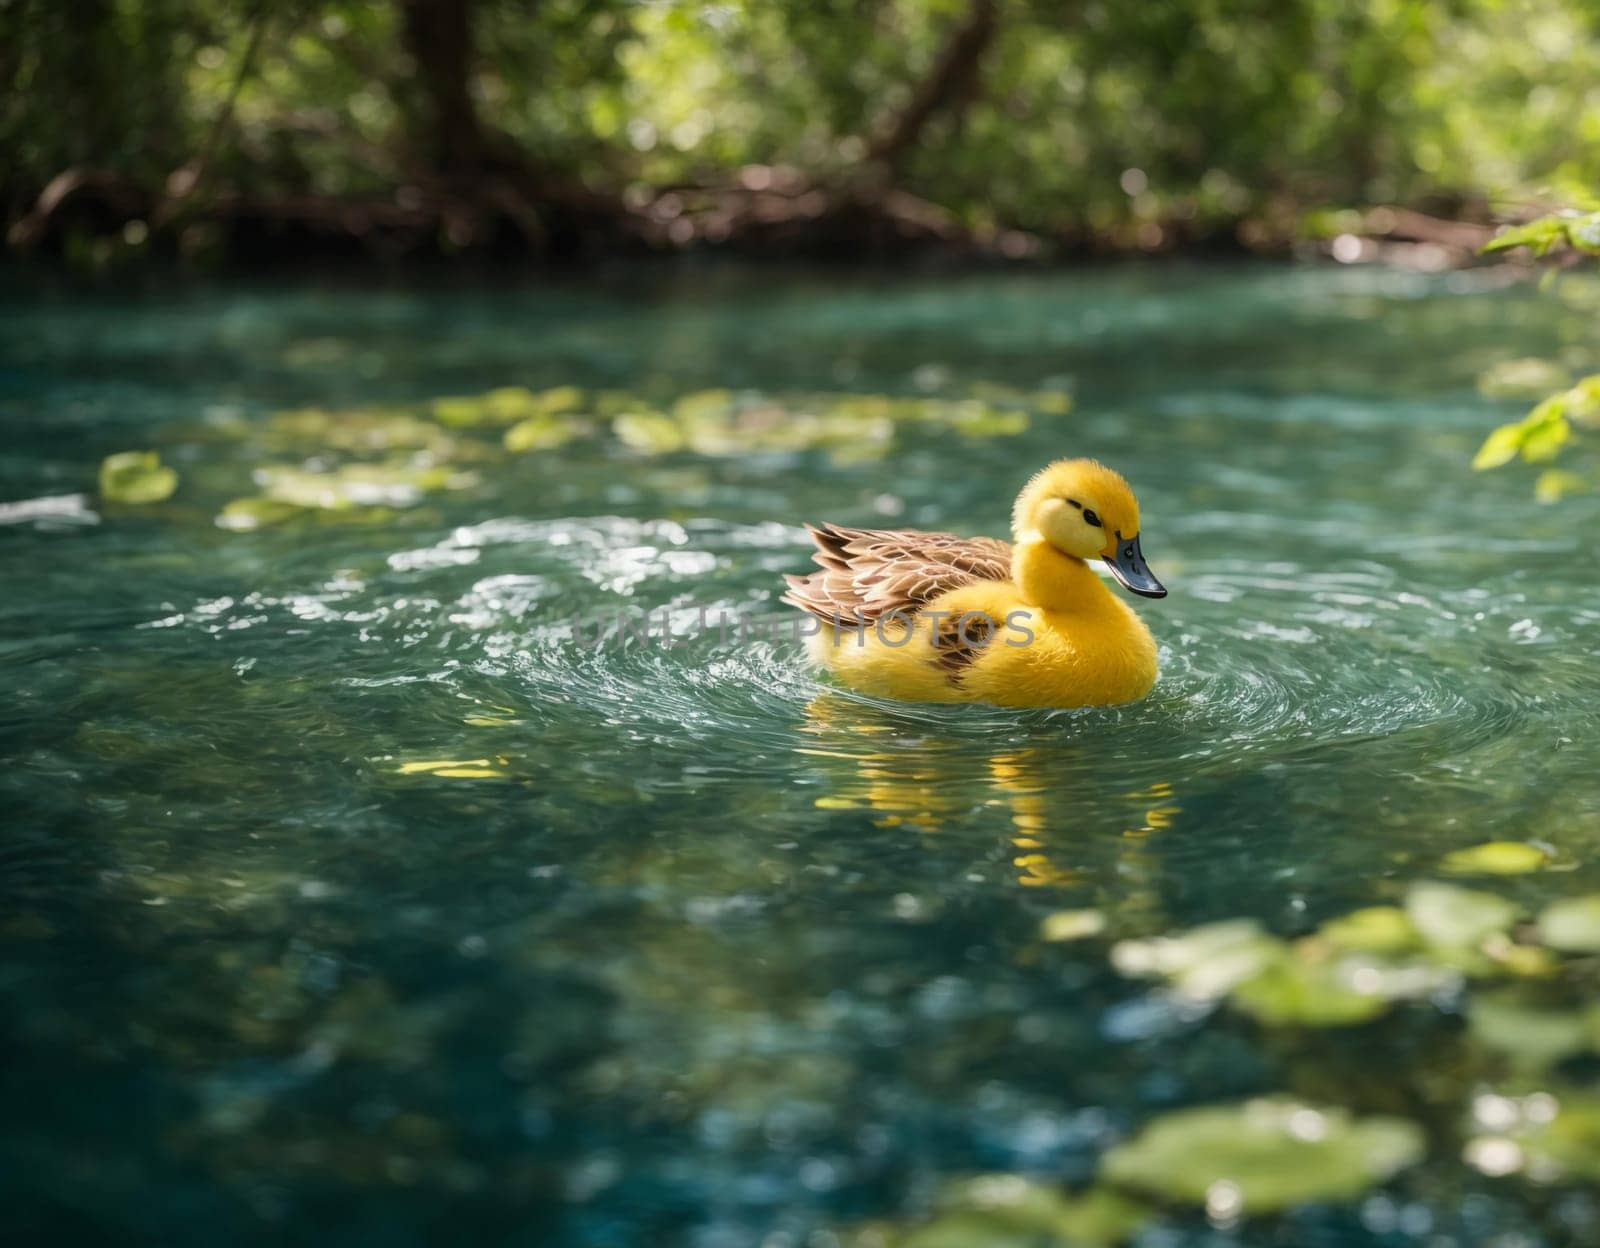 A yellow duckling swims in the bright blue water of the river, surrounded by lush greenery of trees. a small fluffy duckling carelessly swims along a quiet river, its bright yellow fluff shimmers in the sun, reflecting in the clear water.